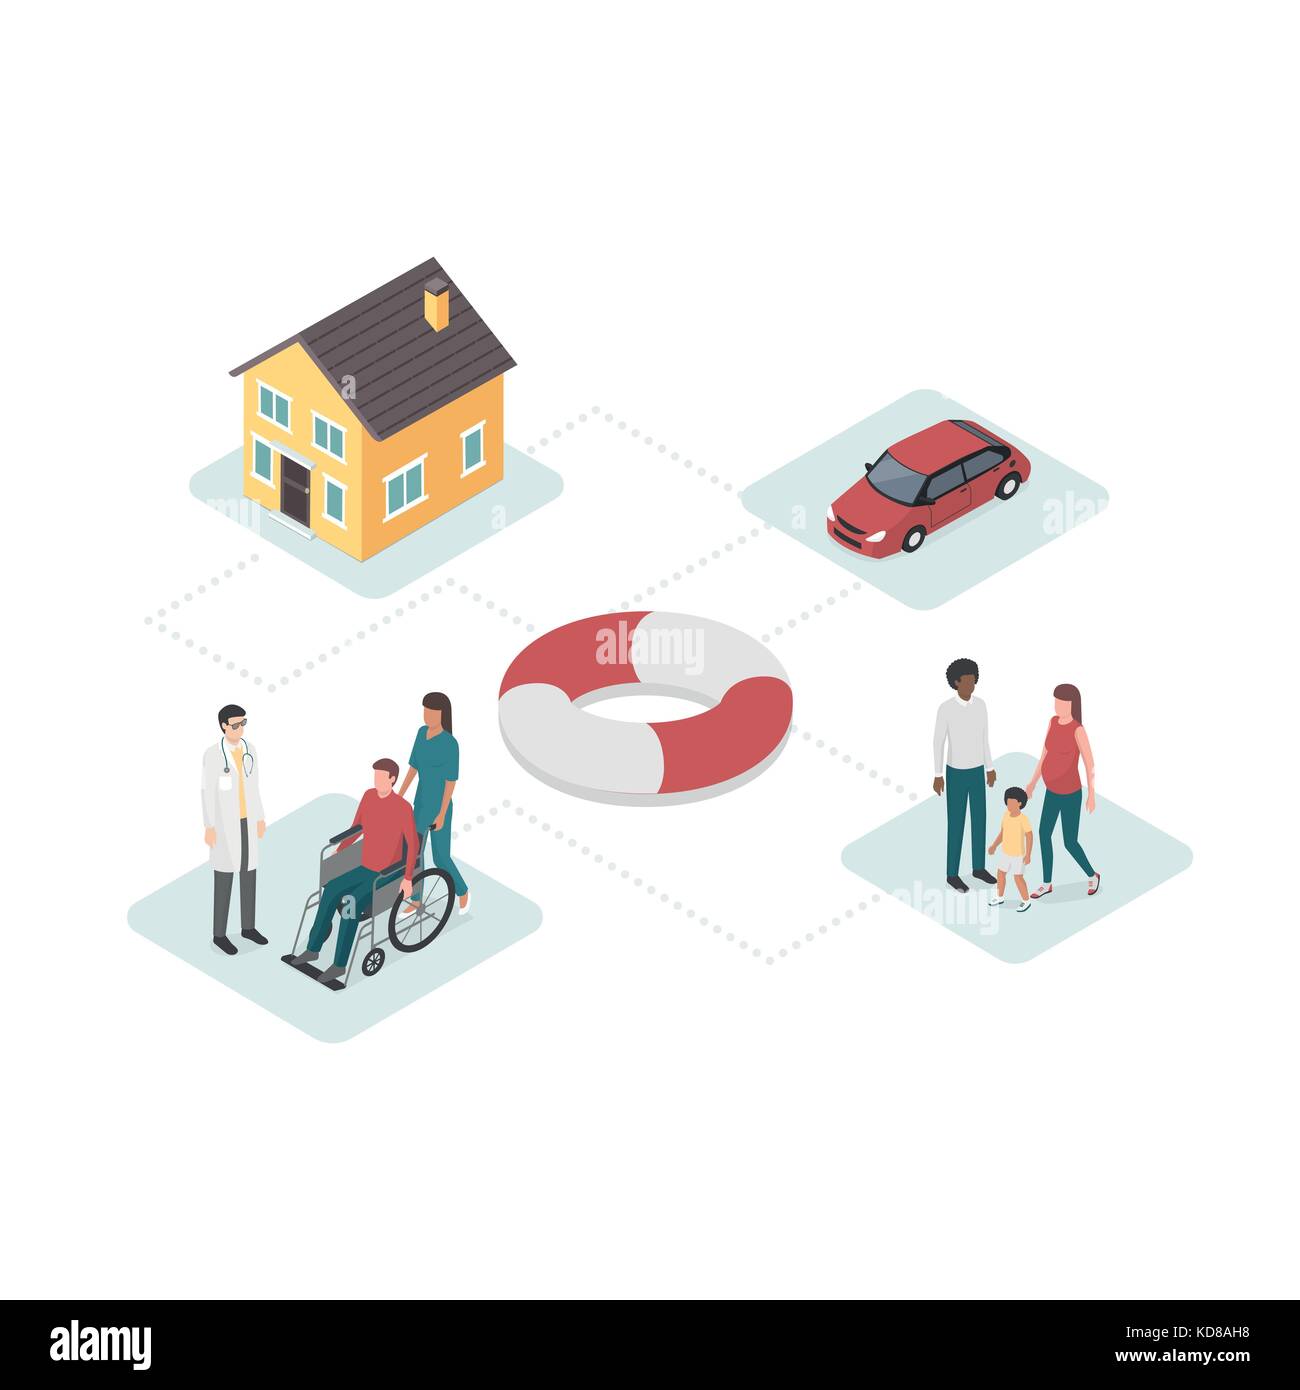 Home, car, health and family insurance plan with lifebelt at center: financial plans and services concept Stock Vector